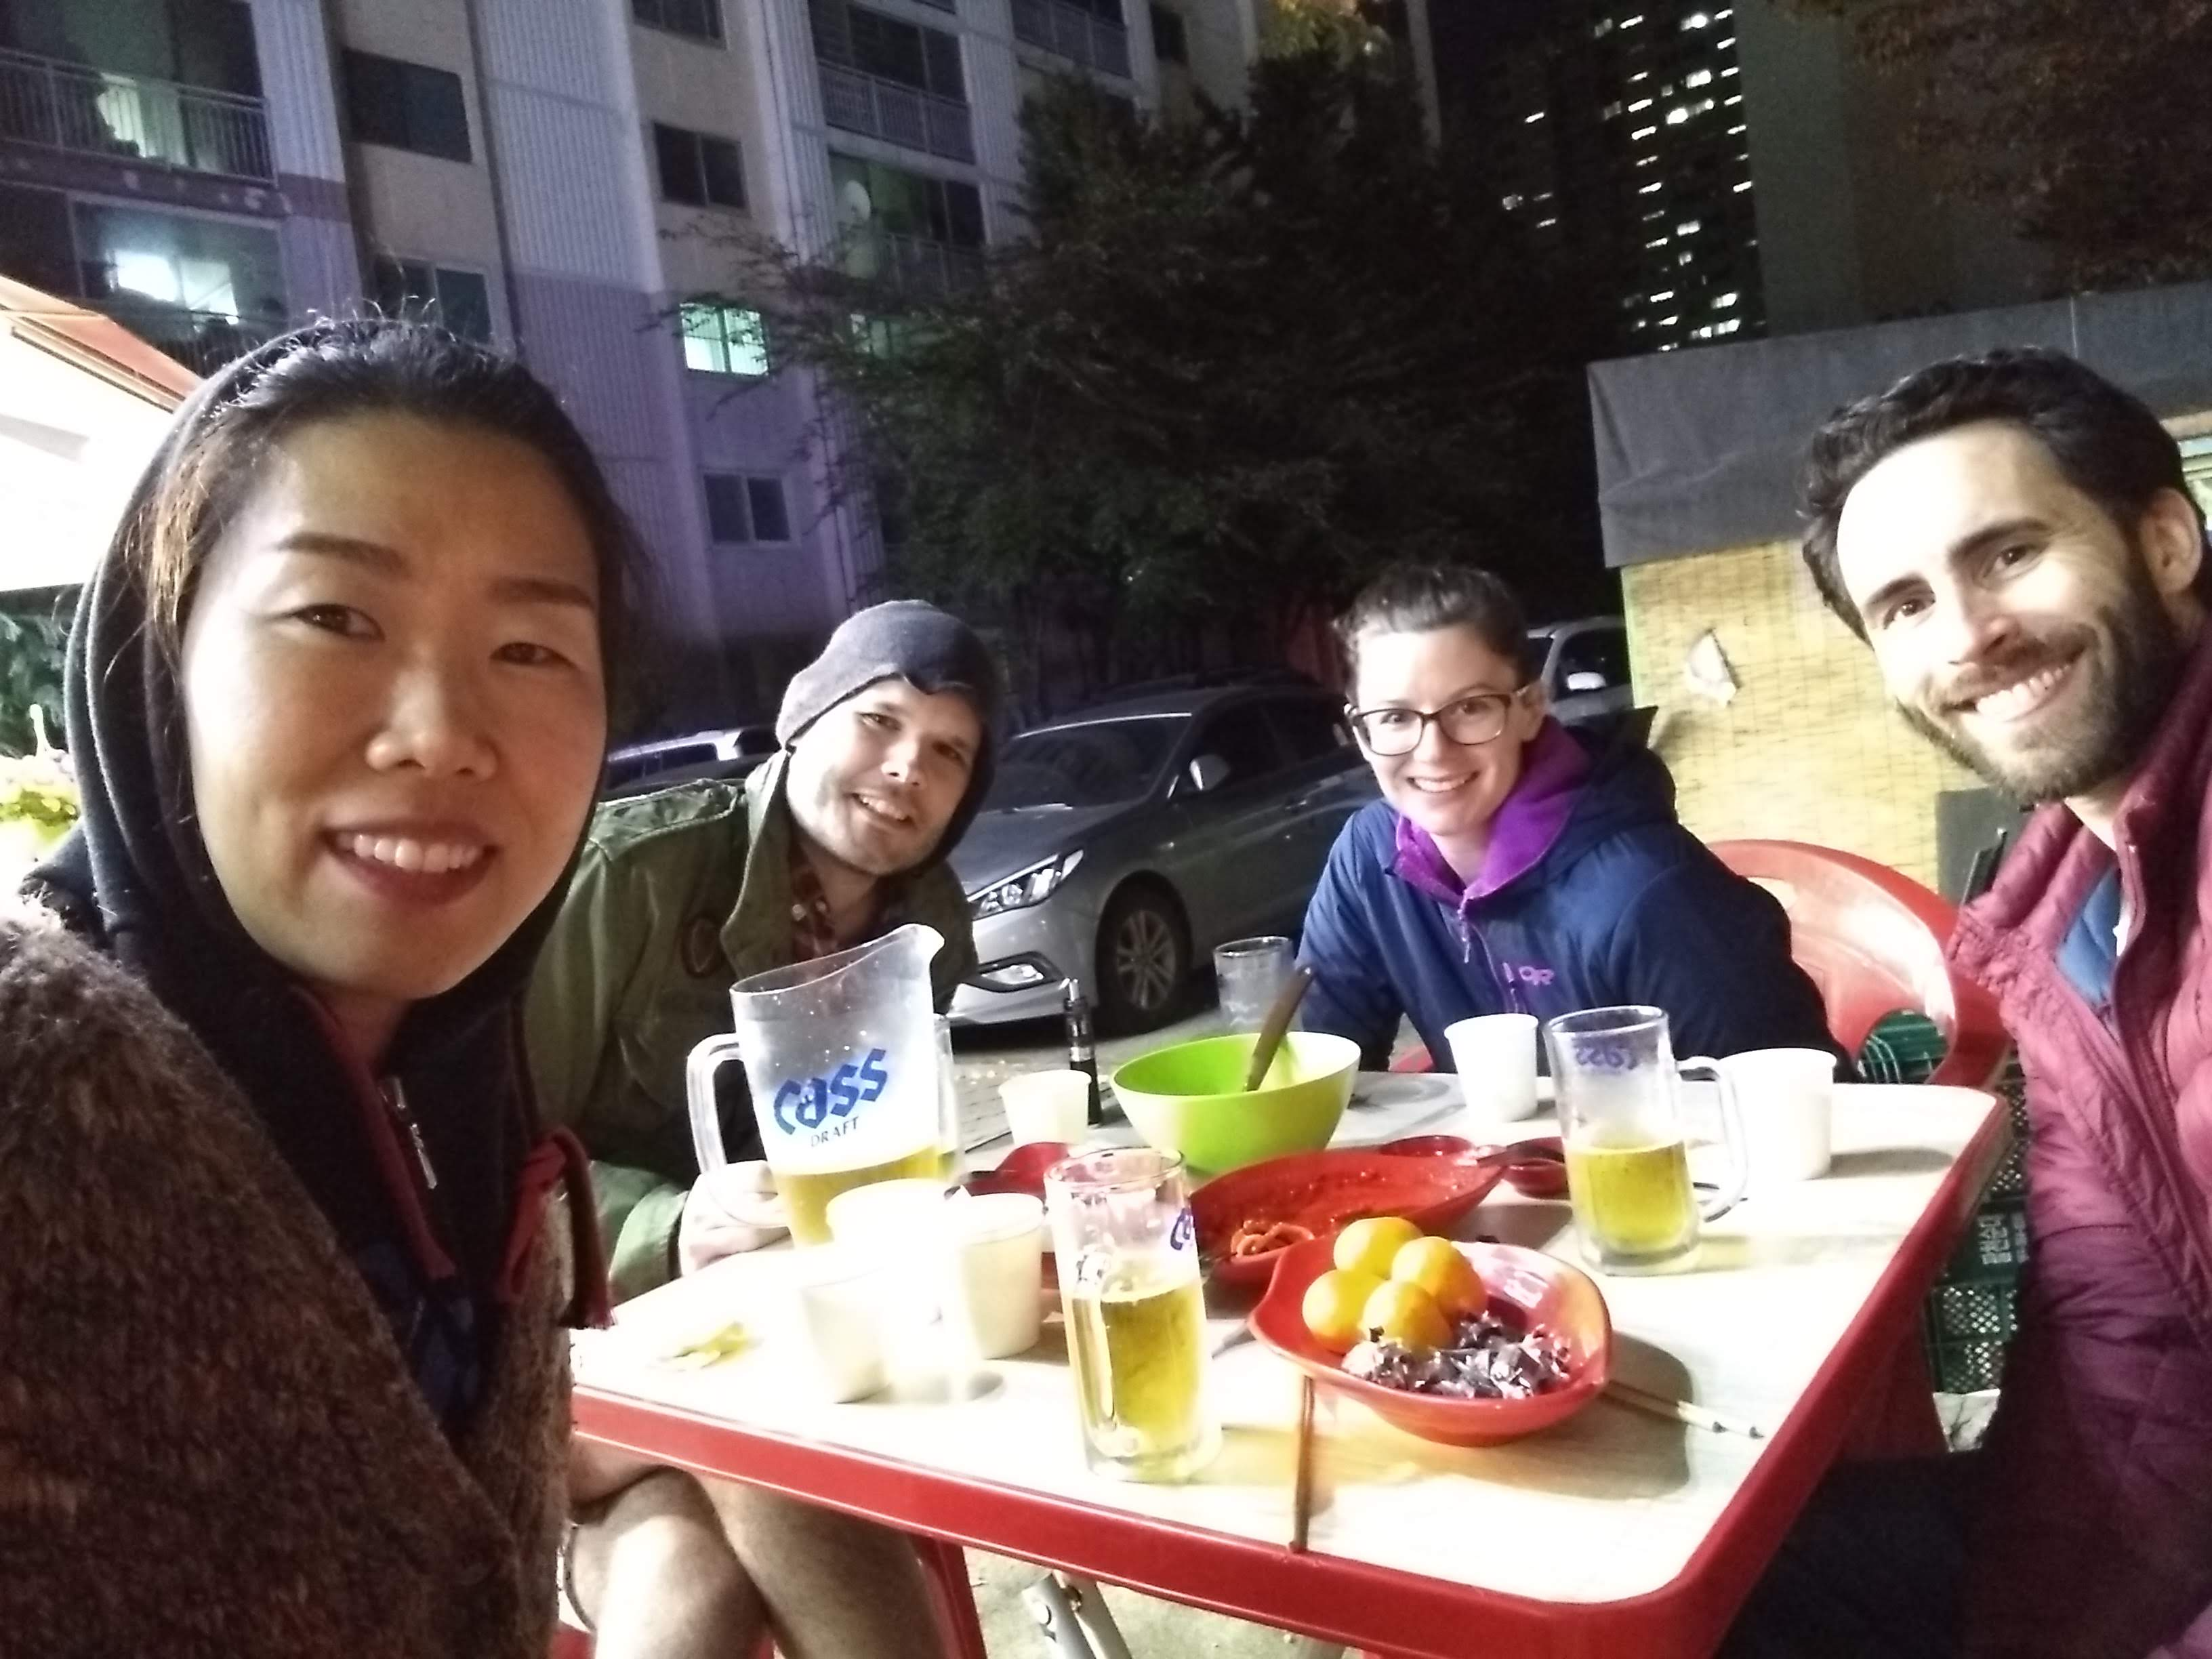 The author & friends in Busan, South Korea, eating snacks & drinking beer at a ddeokboggi stand